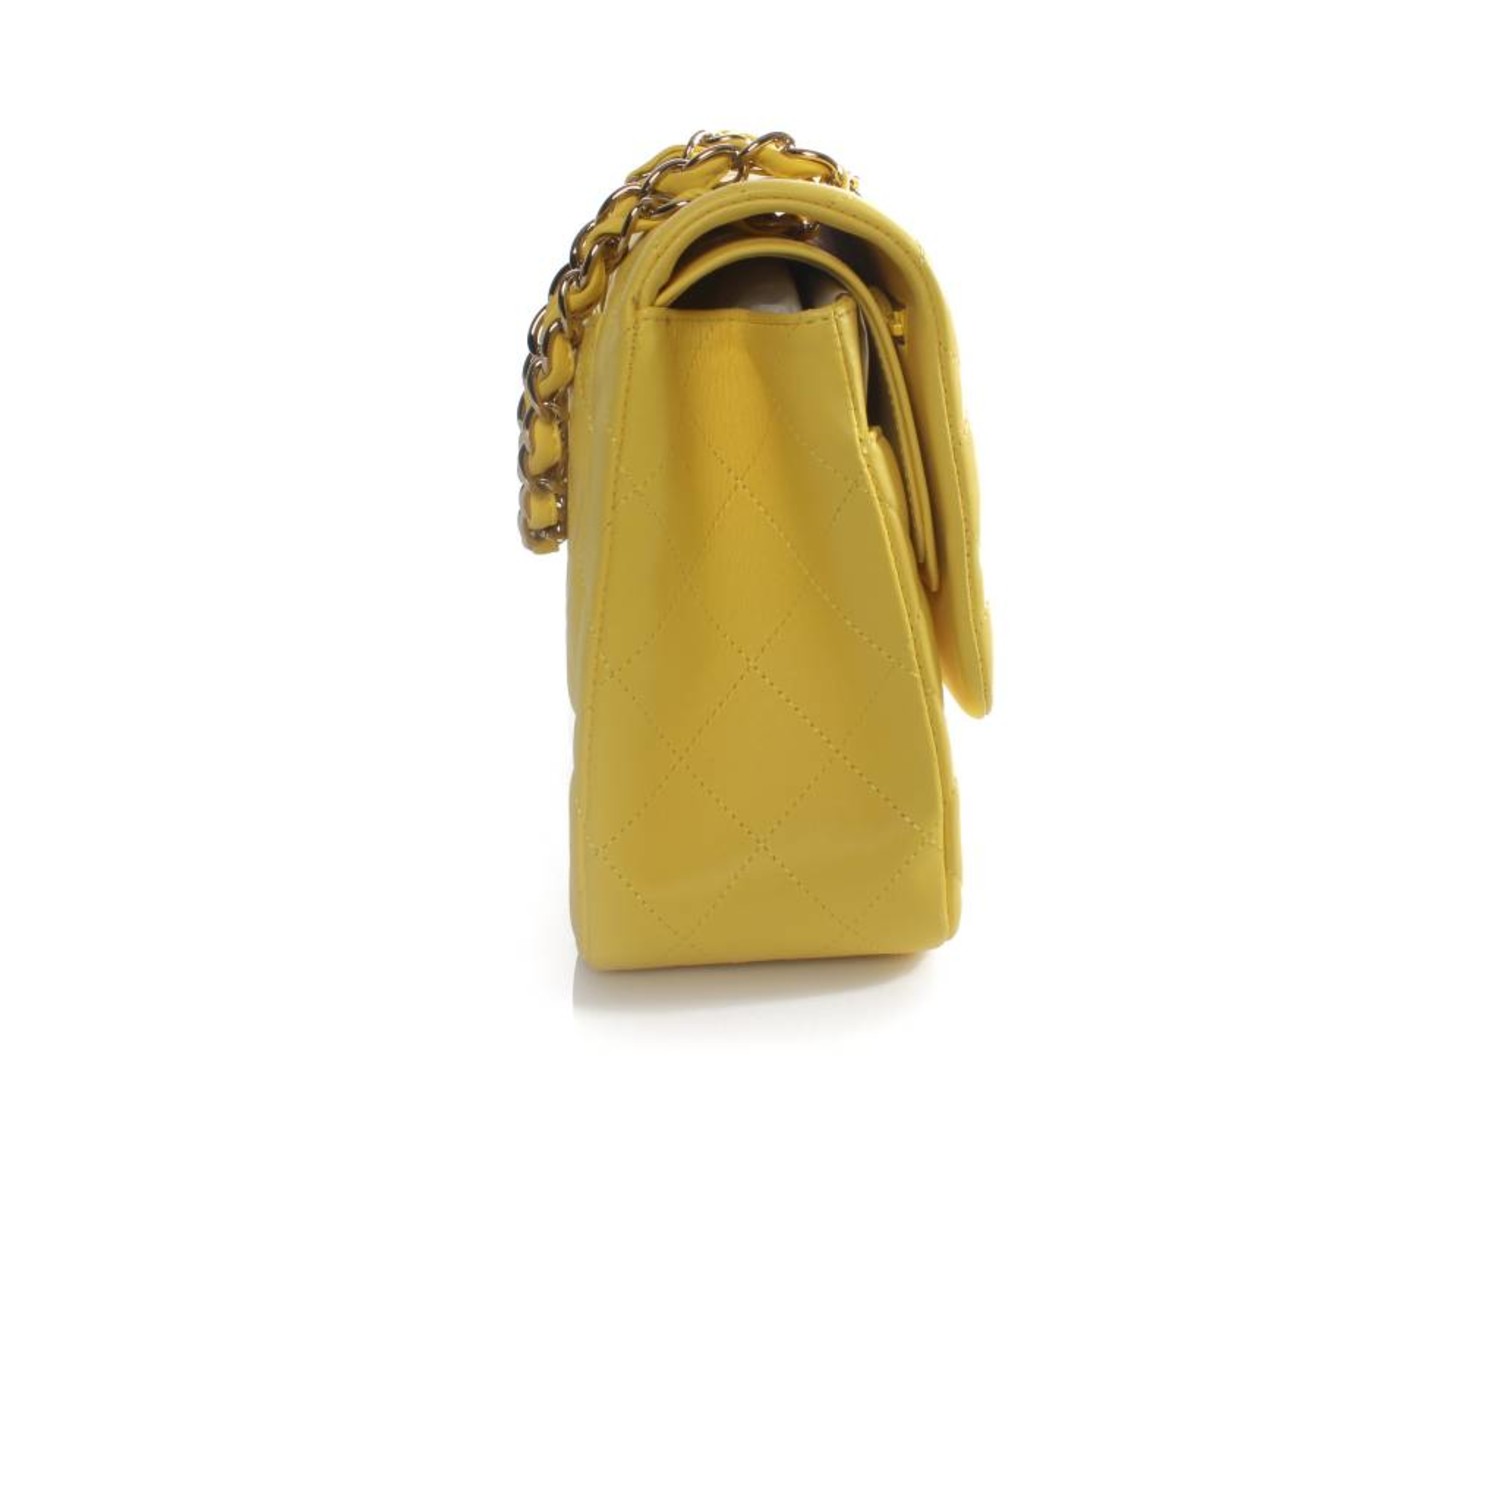 Chanel, Jumbo Classic 2.55 double flap bag in bright yellow - Unique  Designer Pieces